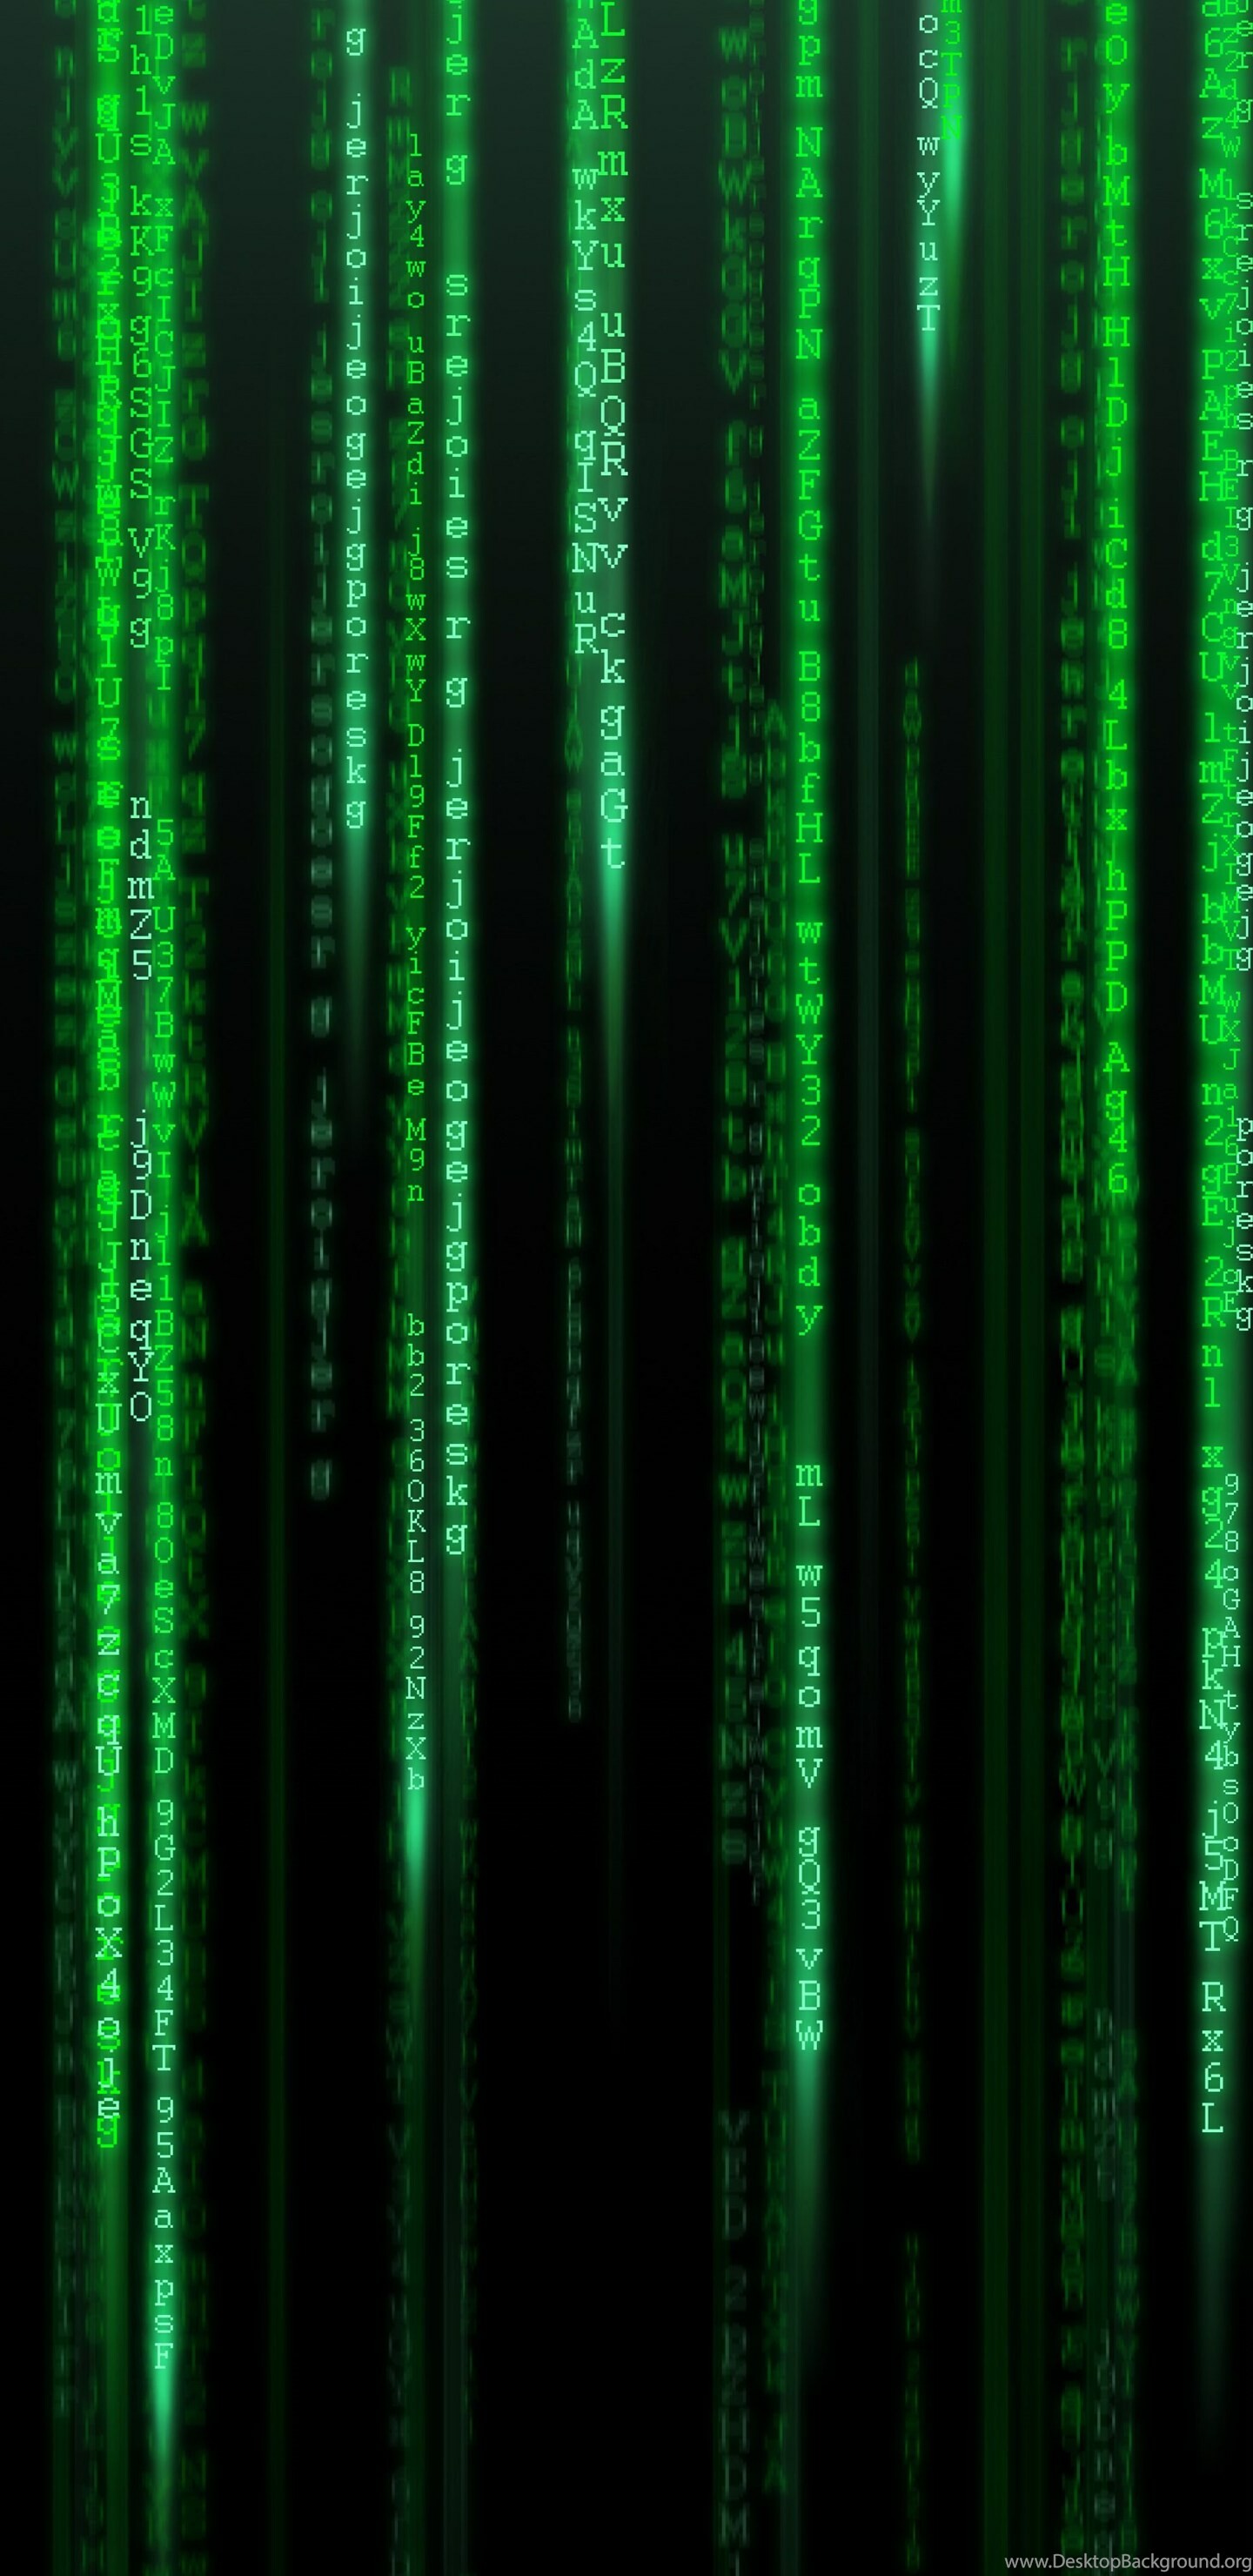 Matrix Franchise: Digital code, The computer code related to the franchise. 1440x2960 HD Wallpaper.